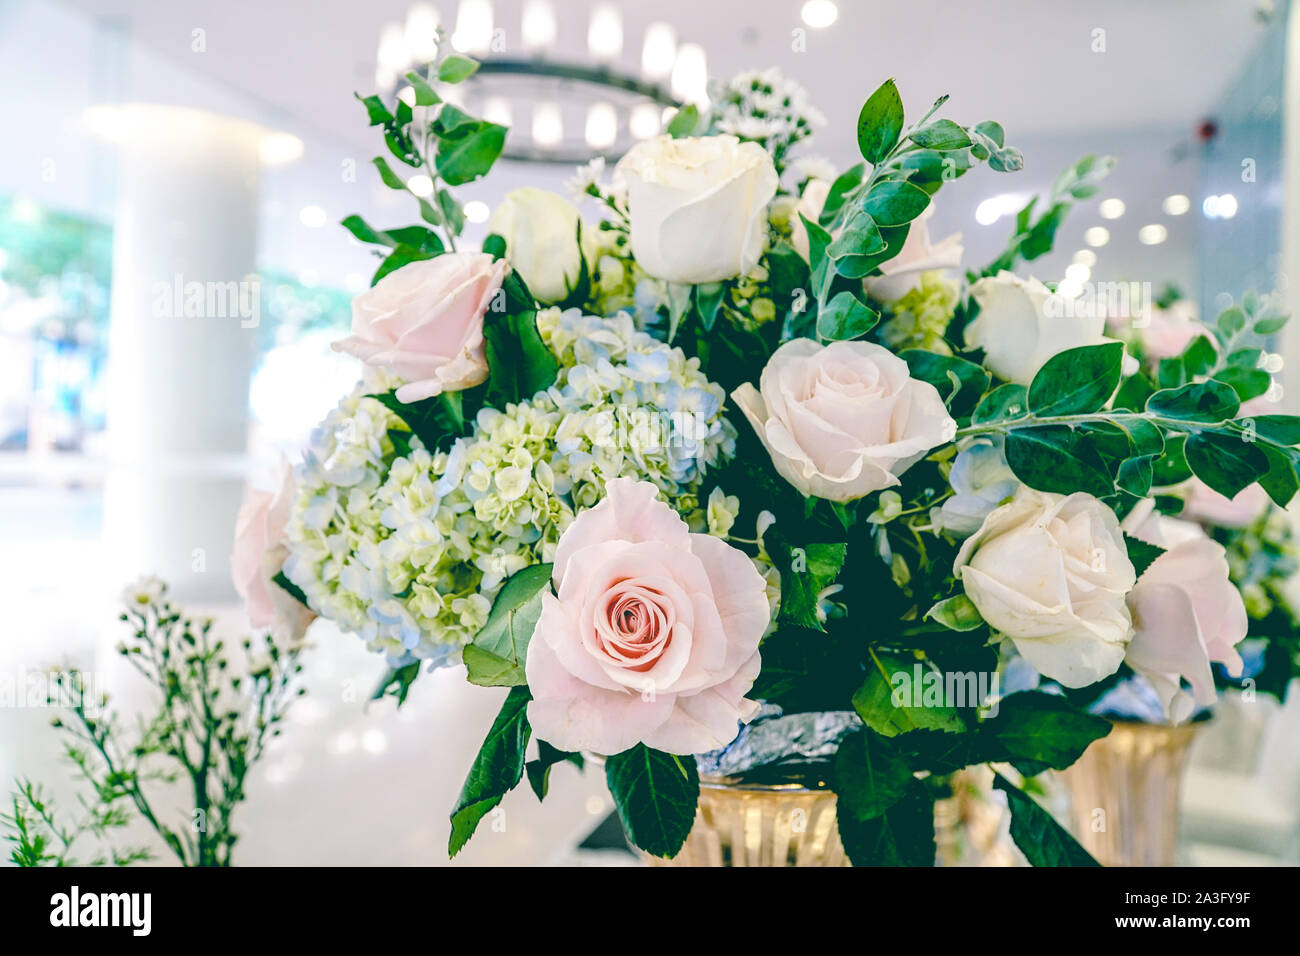 Wedding Welcome table with luxury decoration with rose flower Stock Photo